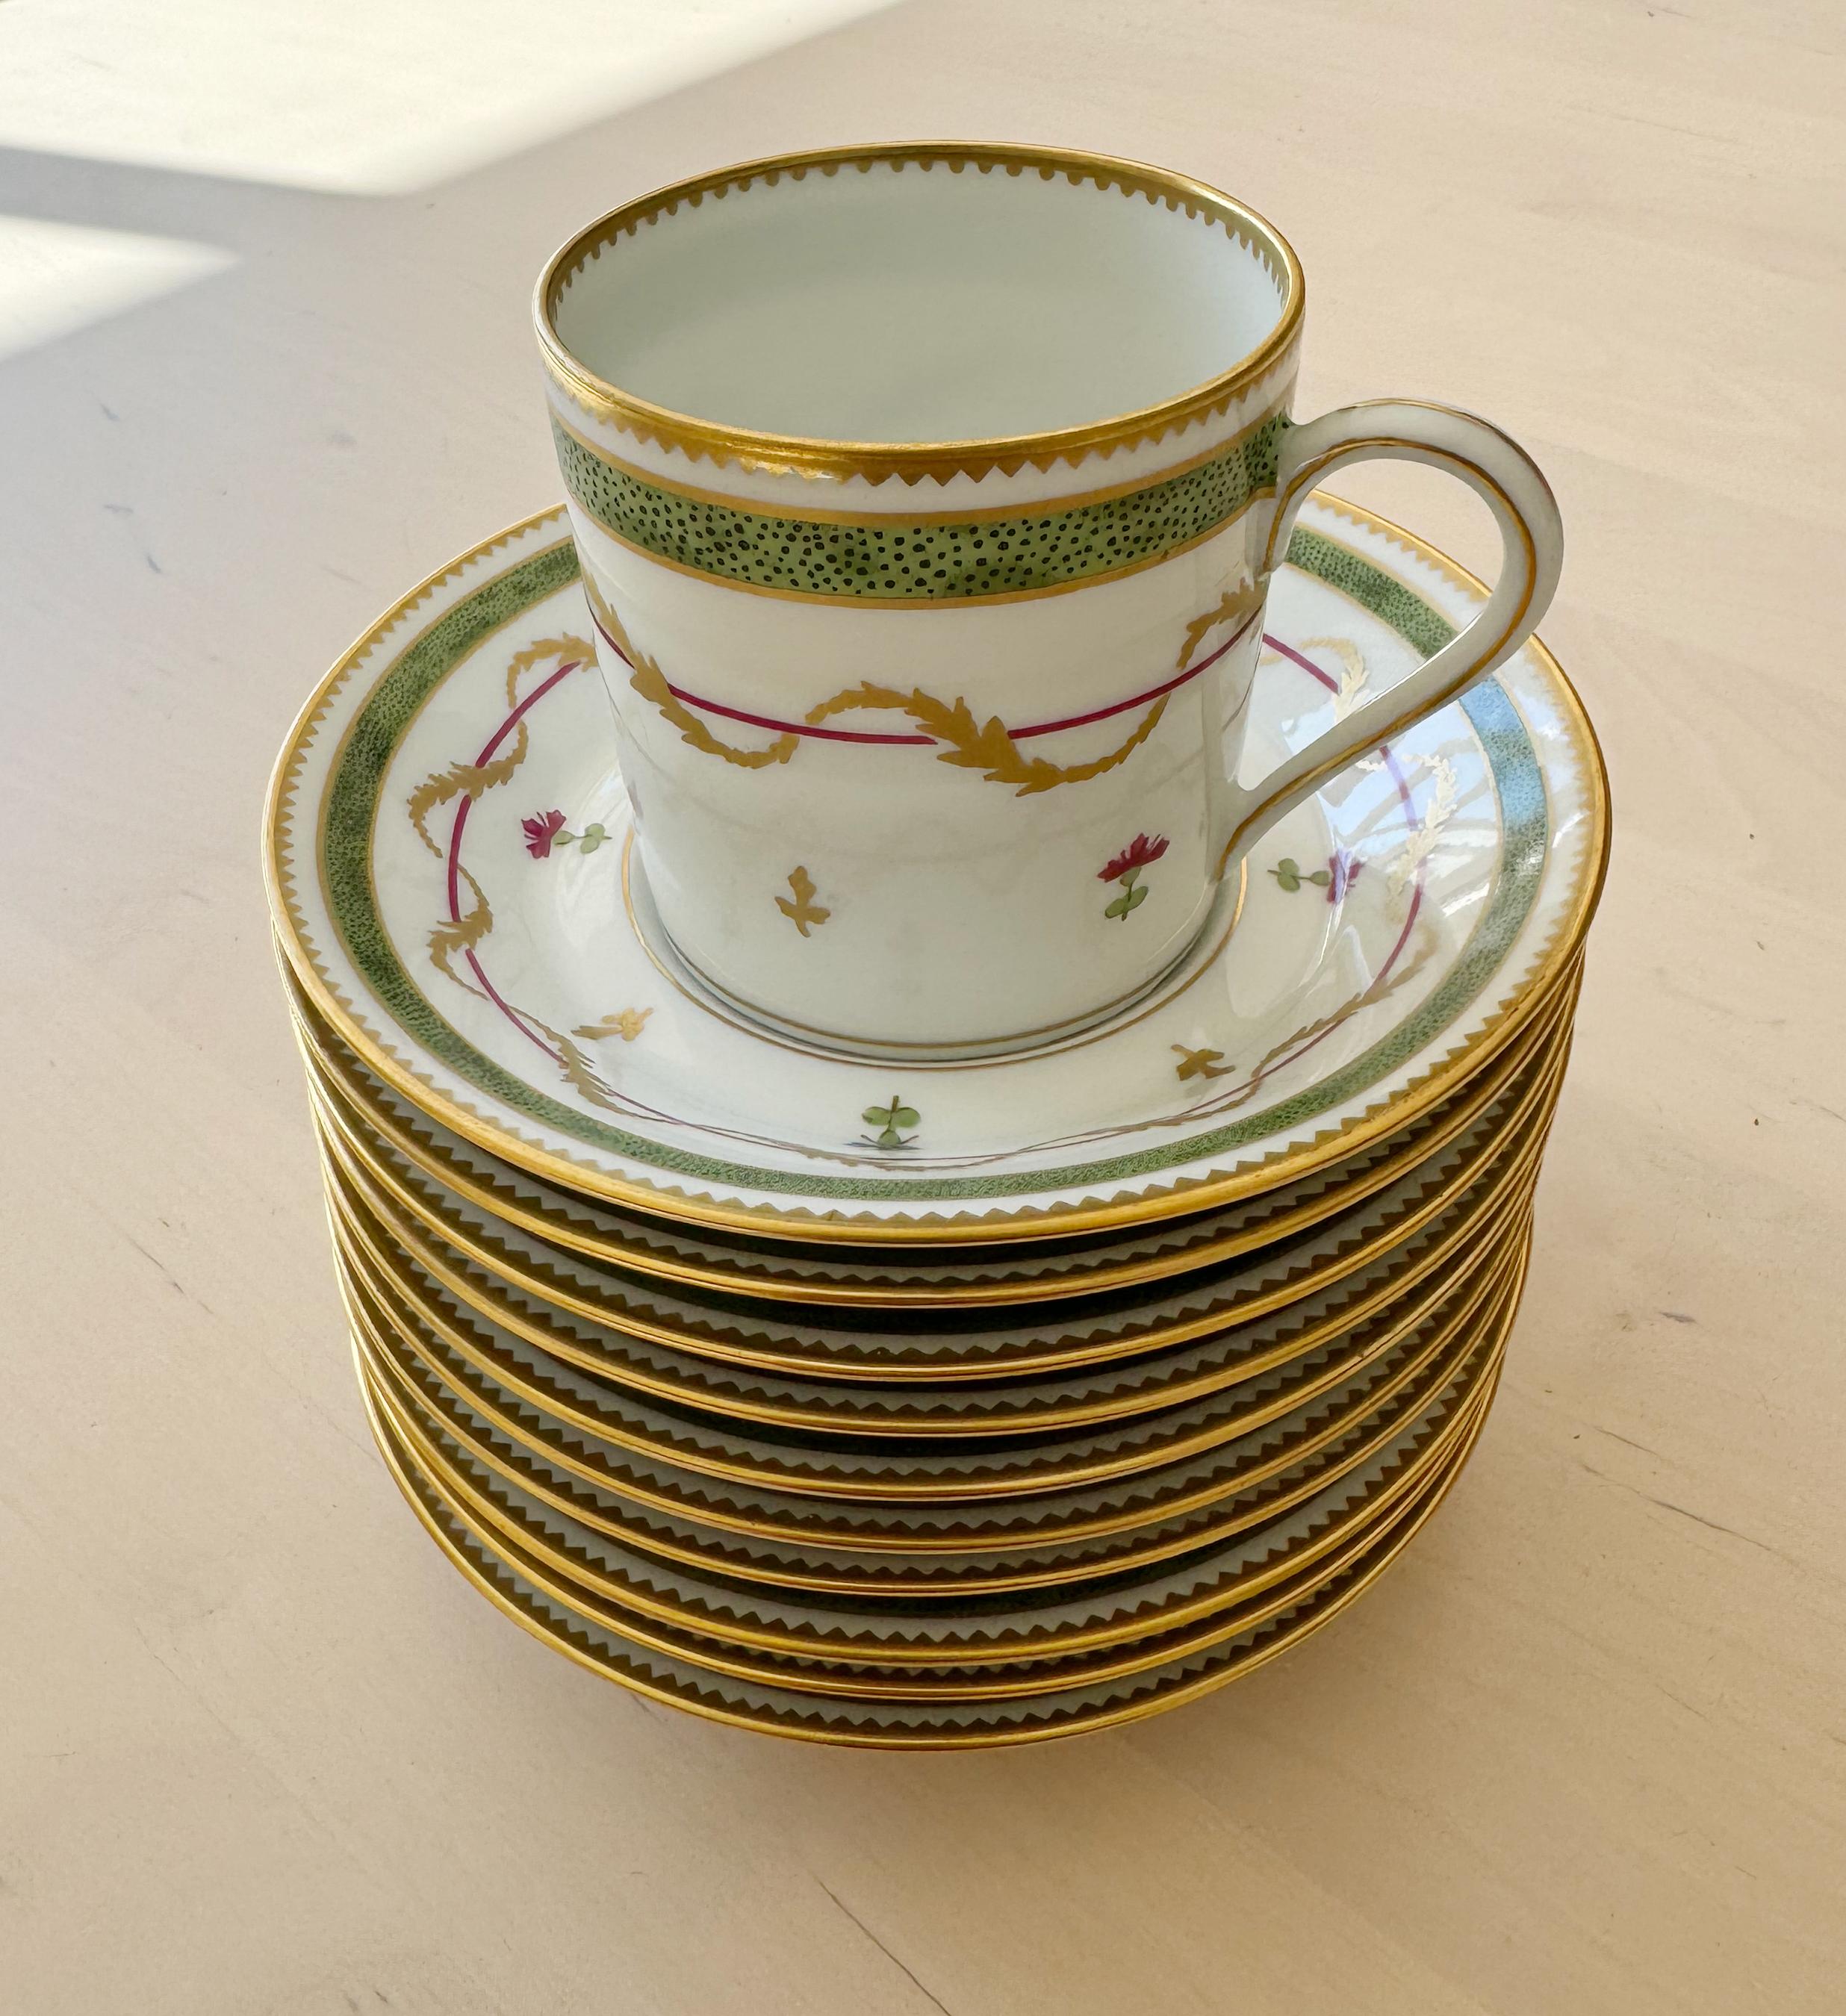 Haviland Vieux Paris  from Limoges is a type of fine porcelain produced by Haviland, a renowned French company known for its high-quality porcelain. Haviland was founded by American businessman David Haviland in the 1840s and quickly gained a